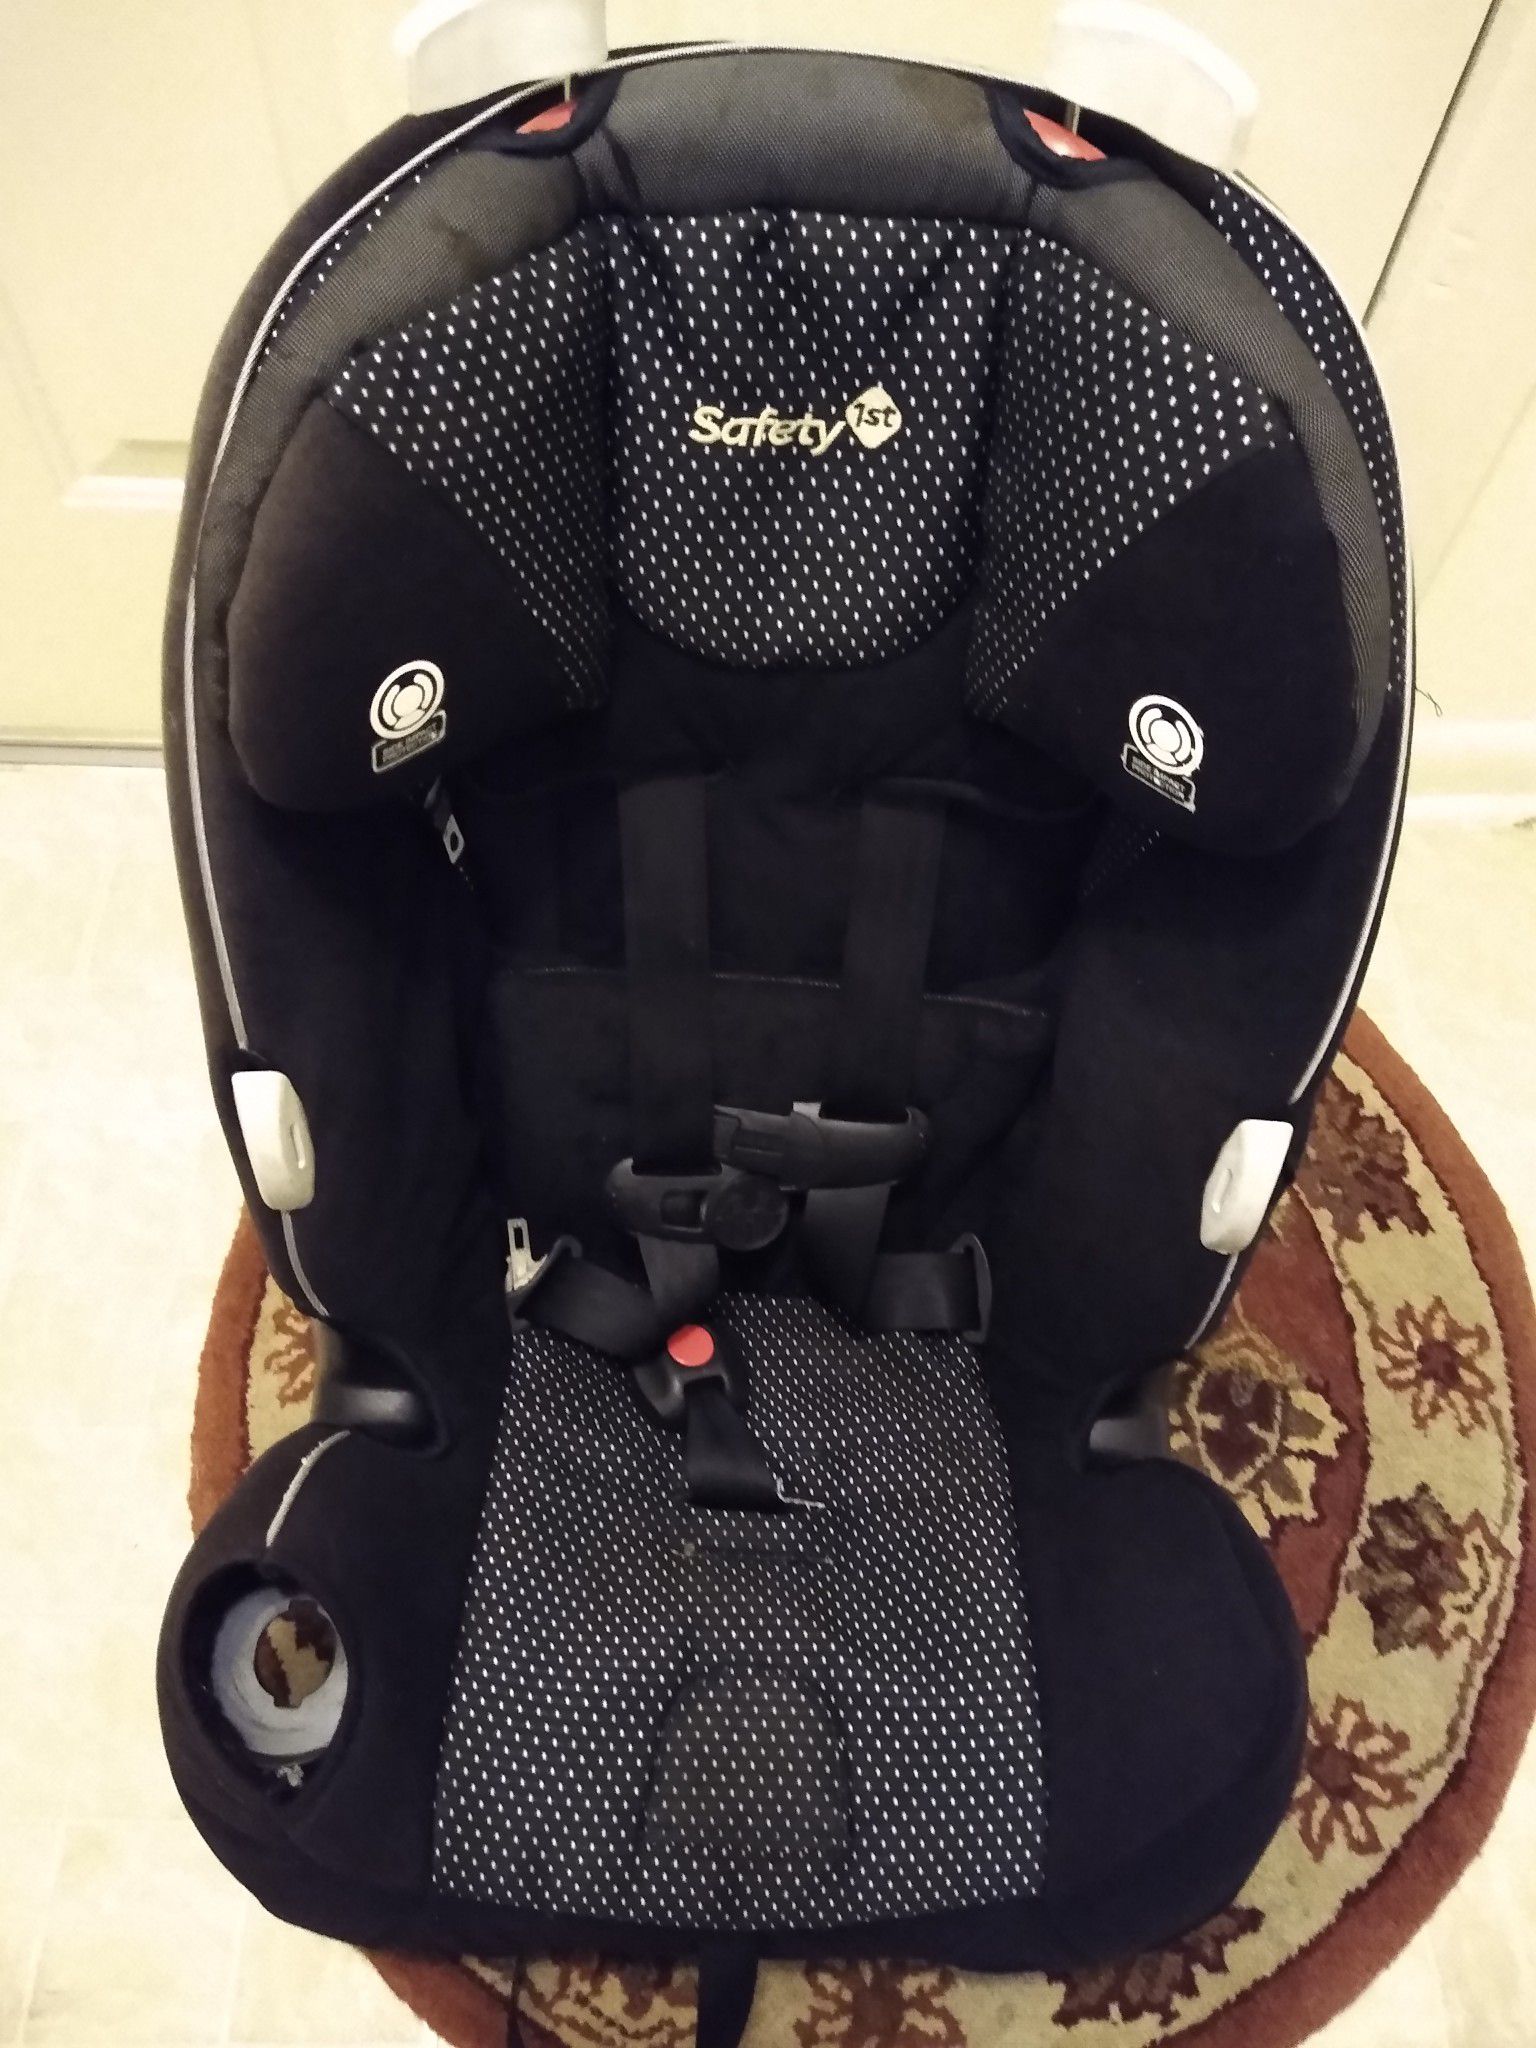 Used car seat missing cup for cup holder 30 head can be adjusted